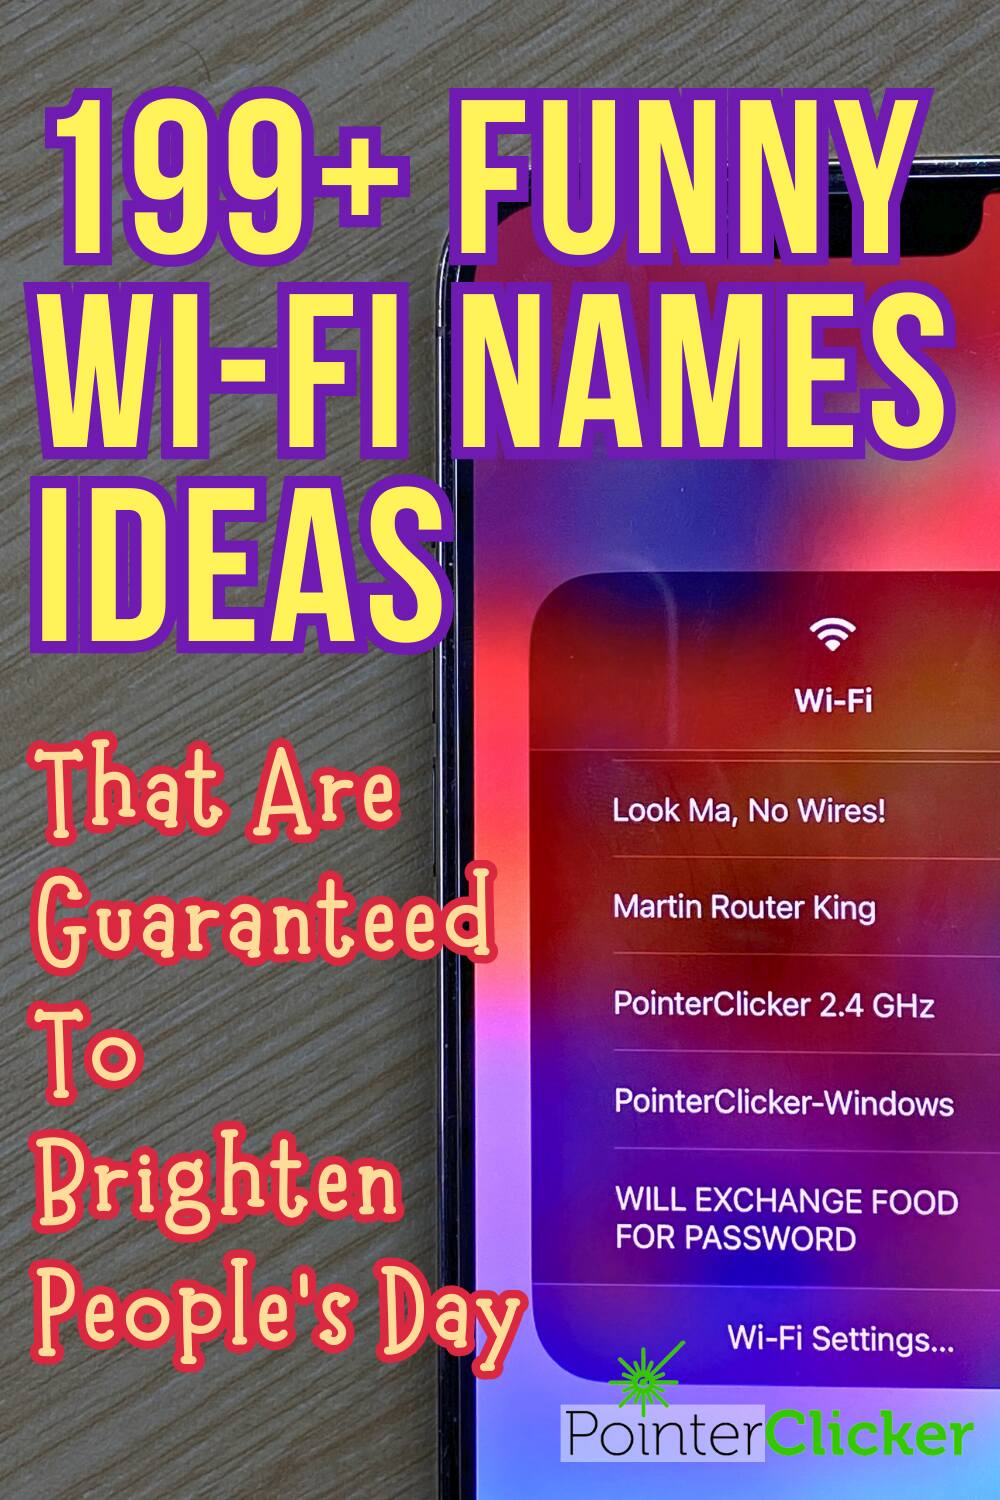 an Iphone showing wifi names on it, the words say'199+ funny wifi names ideas that are guaranteed to make people's day'